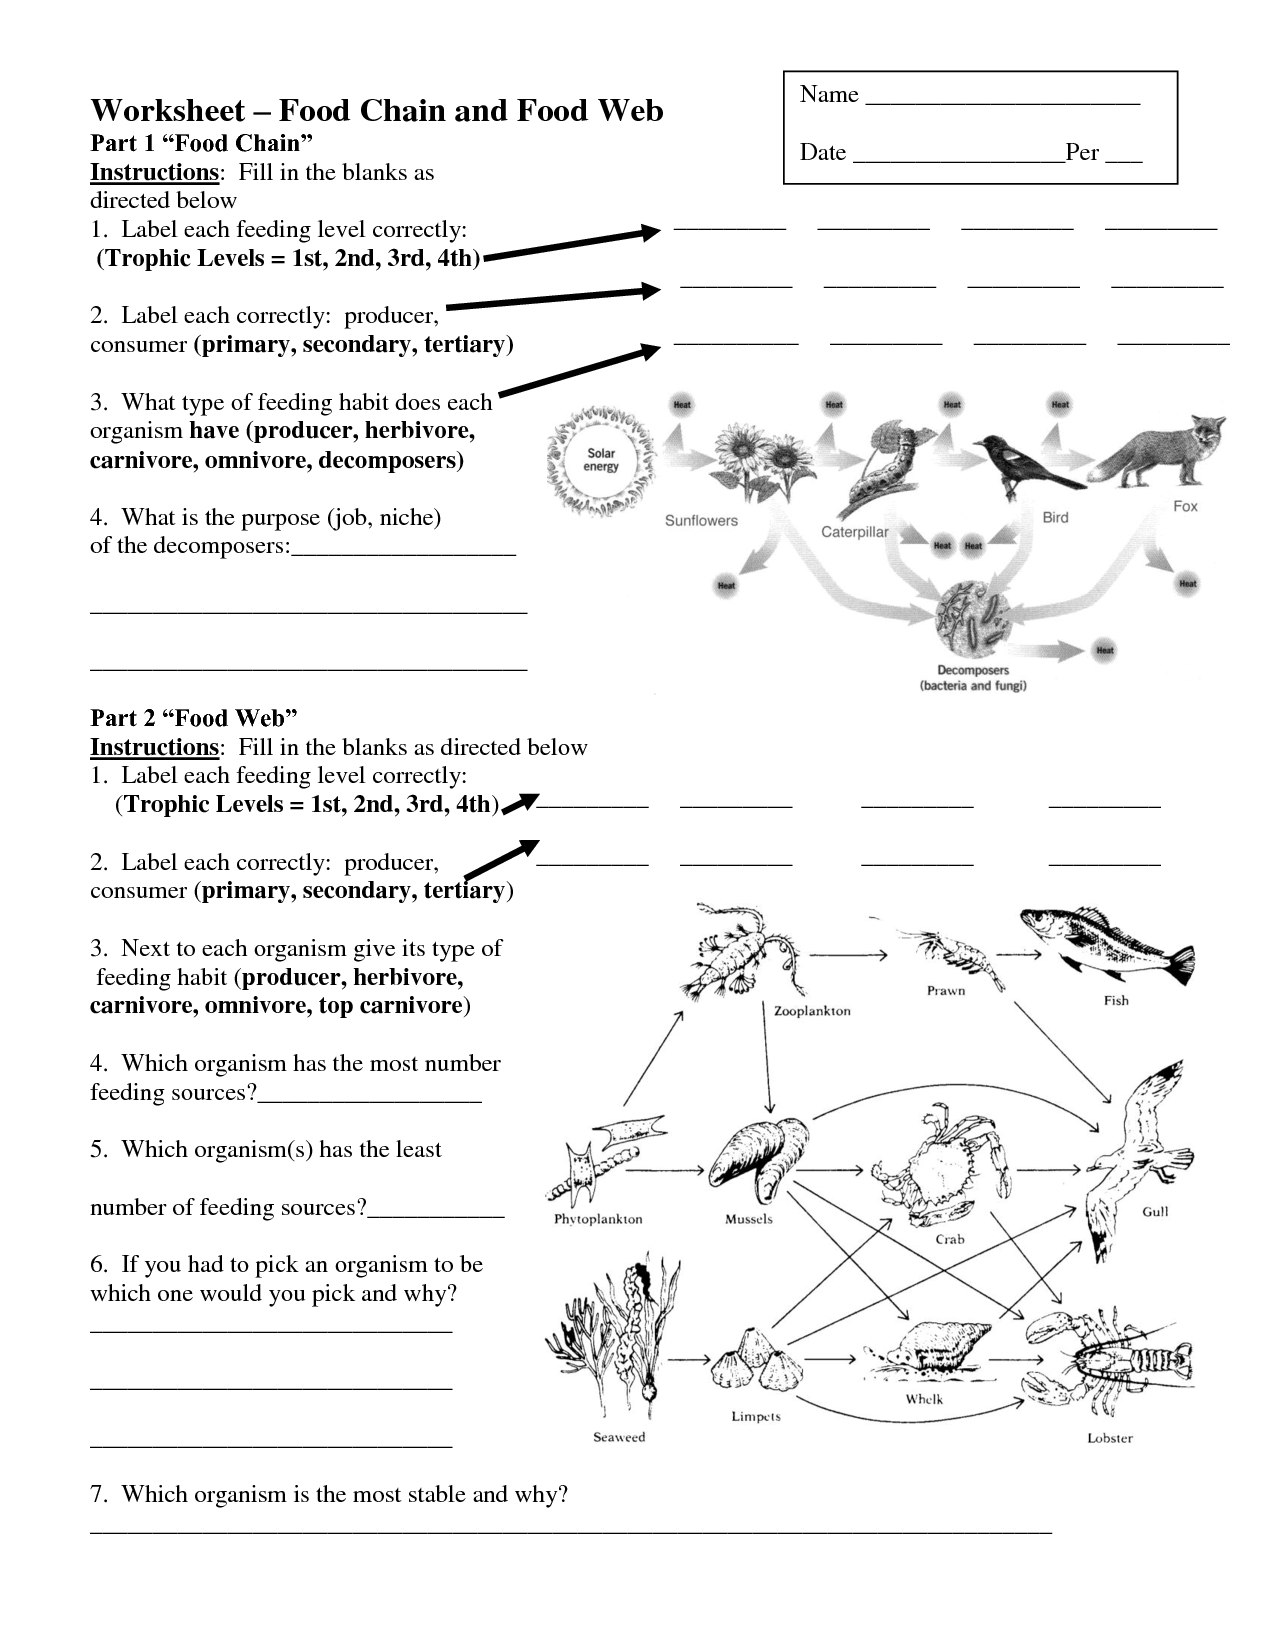 Food Chains and Webs Worksheets Image